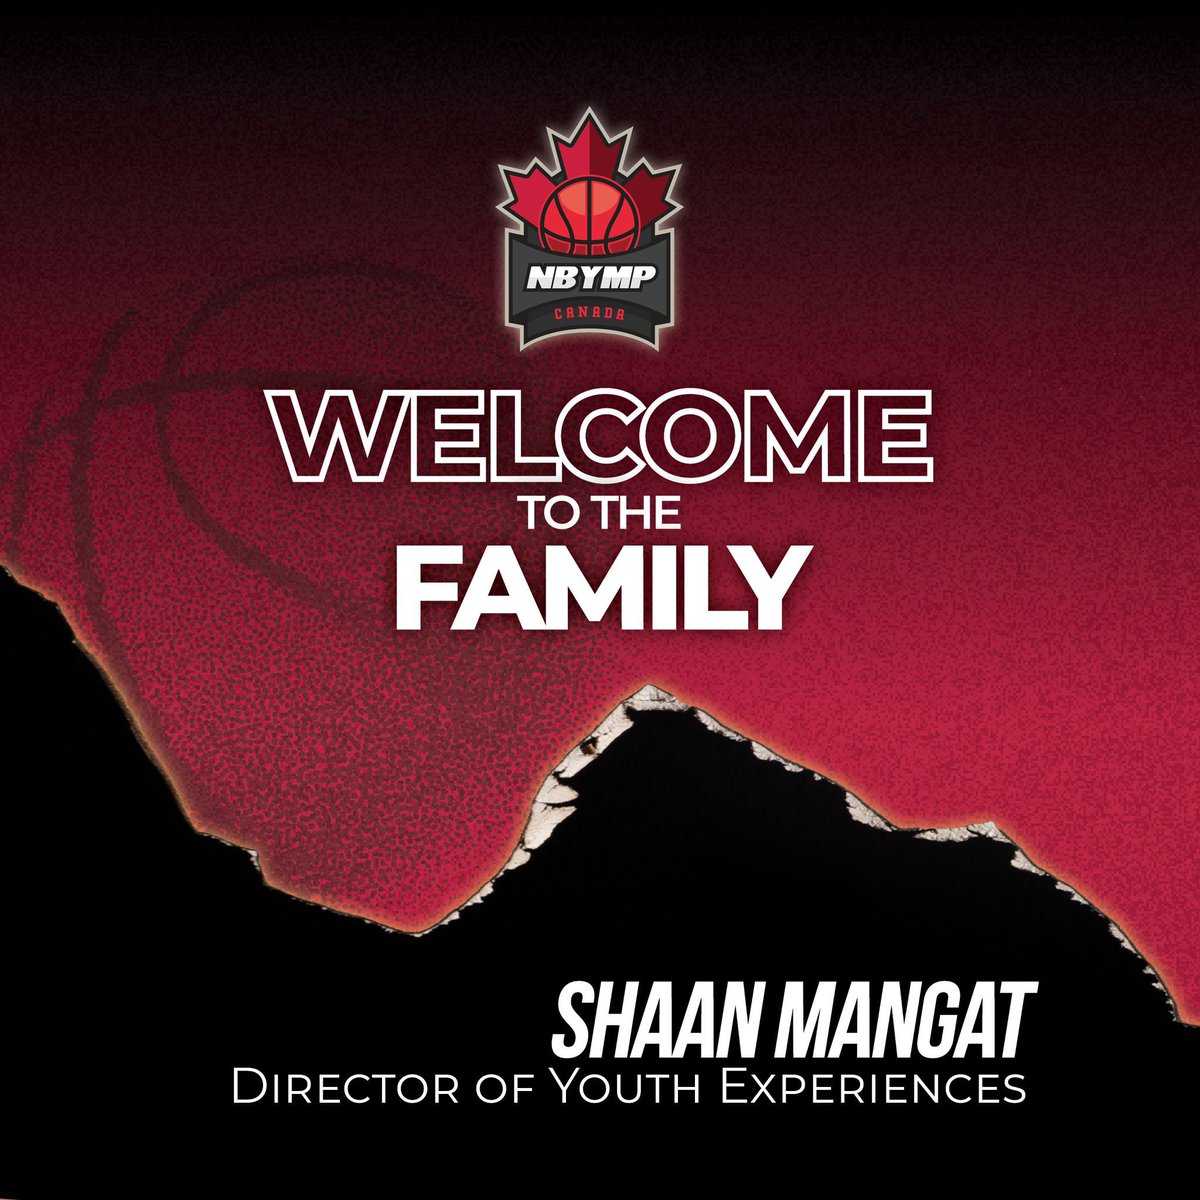 We are EXCITED to welcome Shaan Mangat to the NBYMP family as our Director of Youth Experiences! 🏀🇨🇦